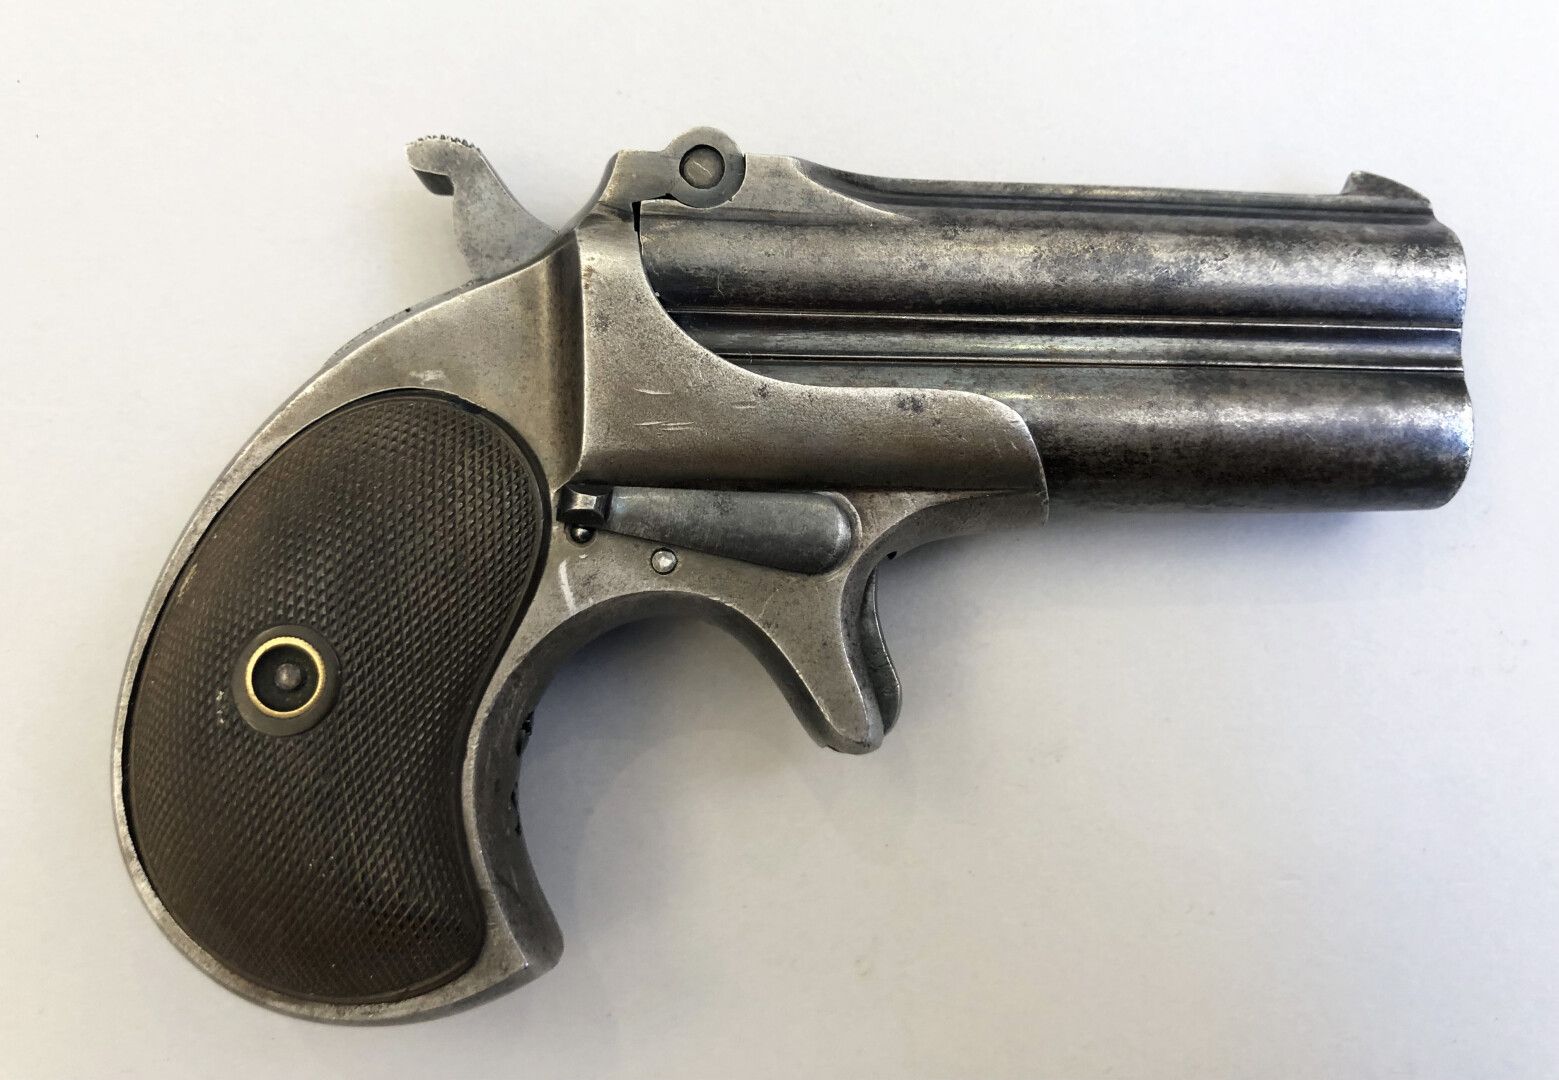 Null Derringer Remington Arms 41 caliber pistol and R.F. Weapon having turned to&hellip;